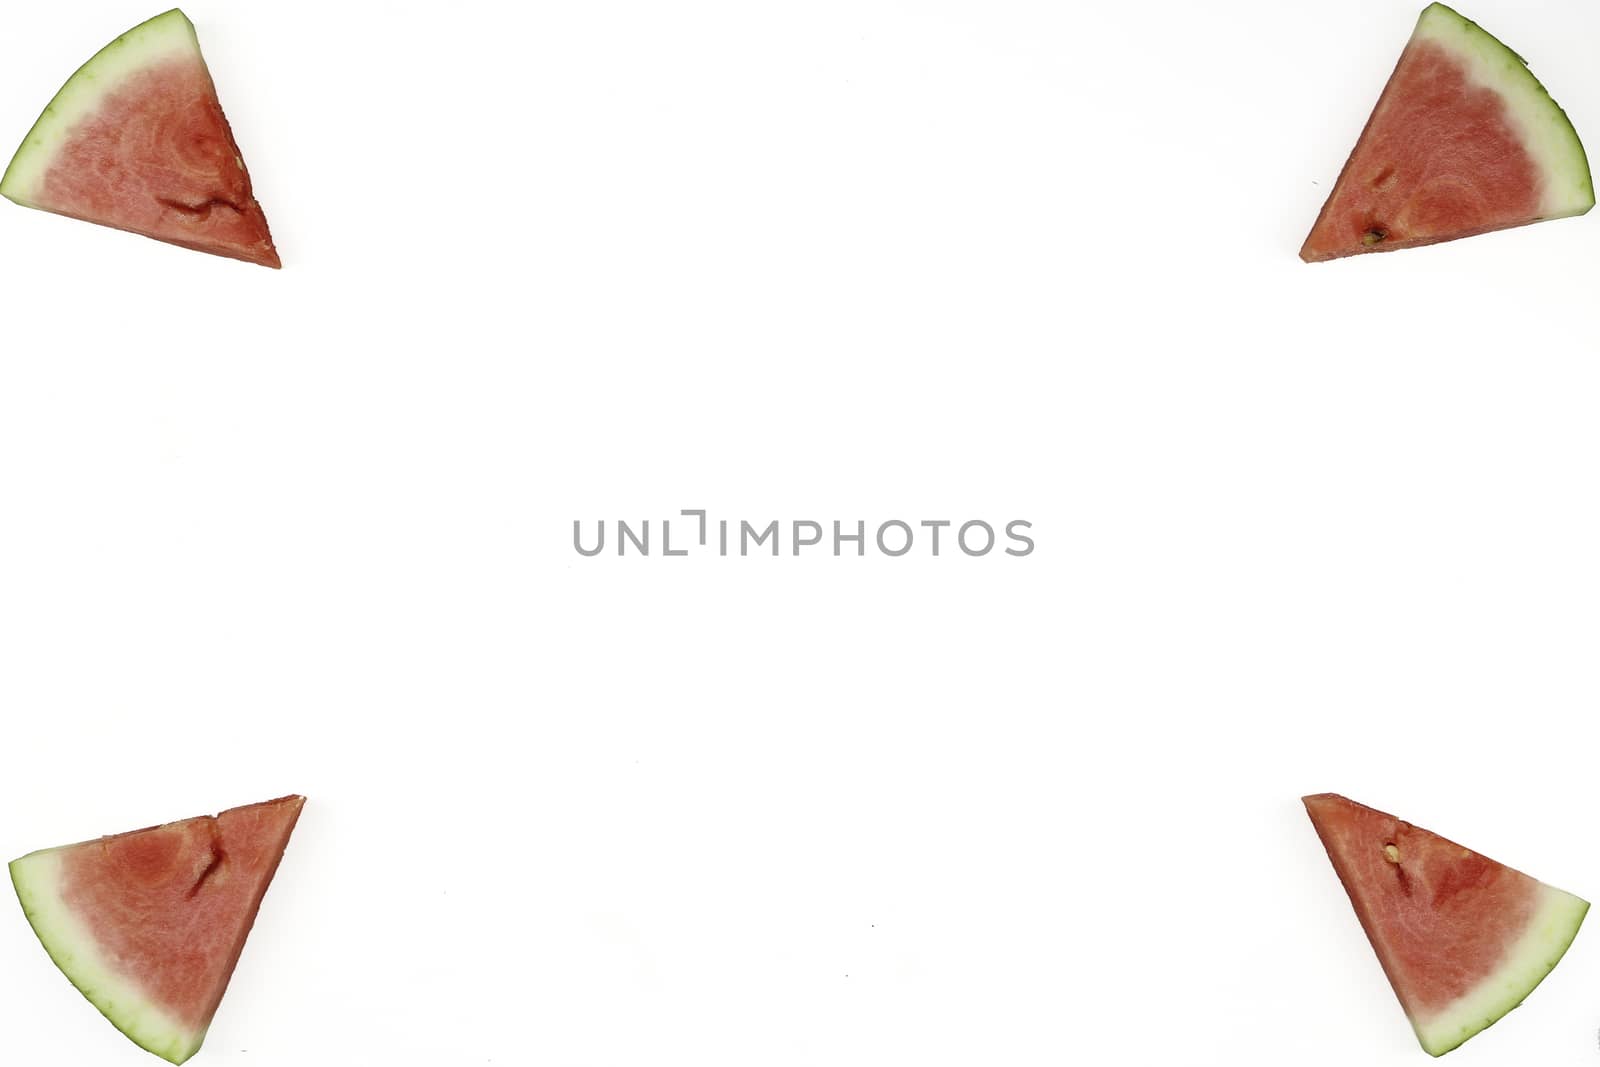 Triangular isolated slices of watermelon forming geometric games for copy space on a white background by robbyfontanesi